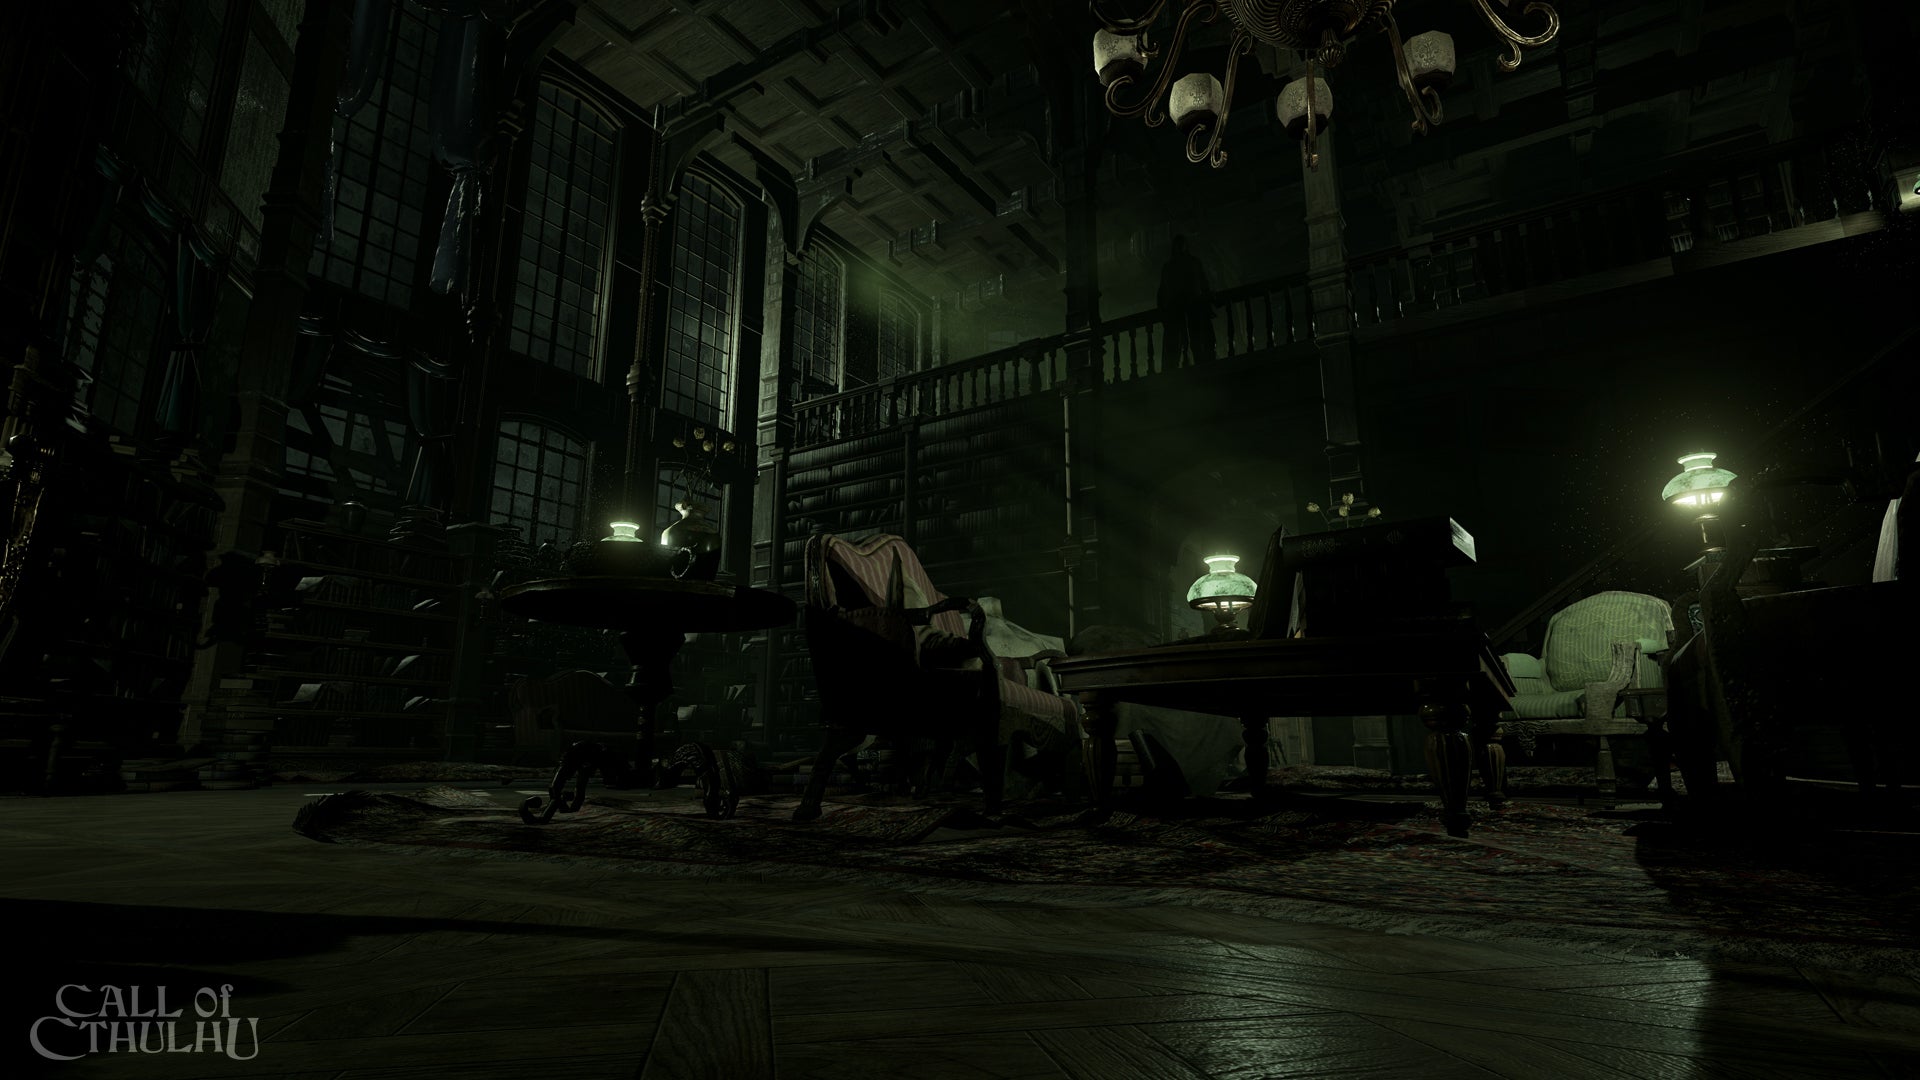 Image for Call of Cthulhu out in 2017, first screenshots are rather dark and ominous